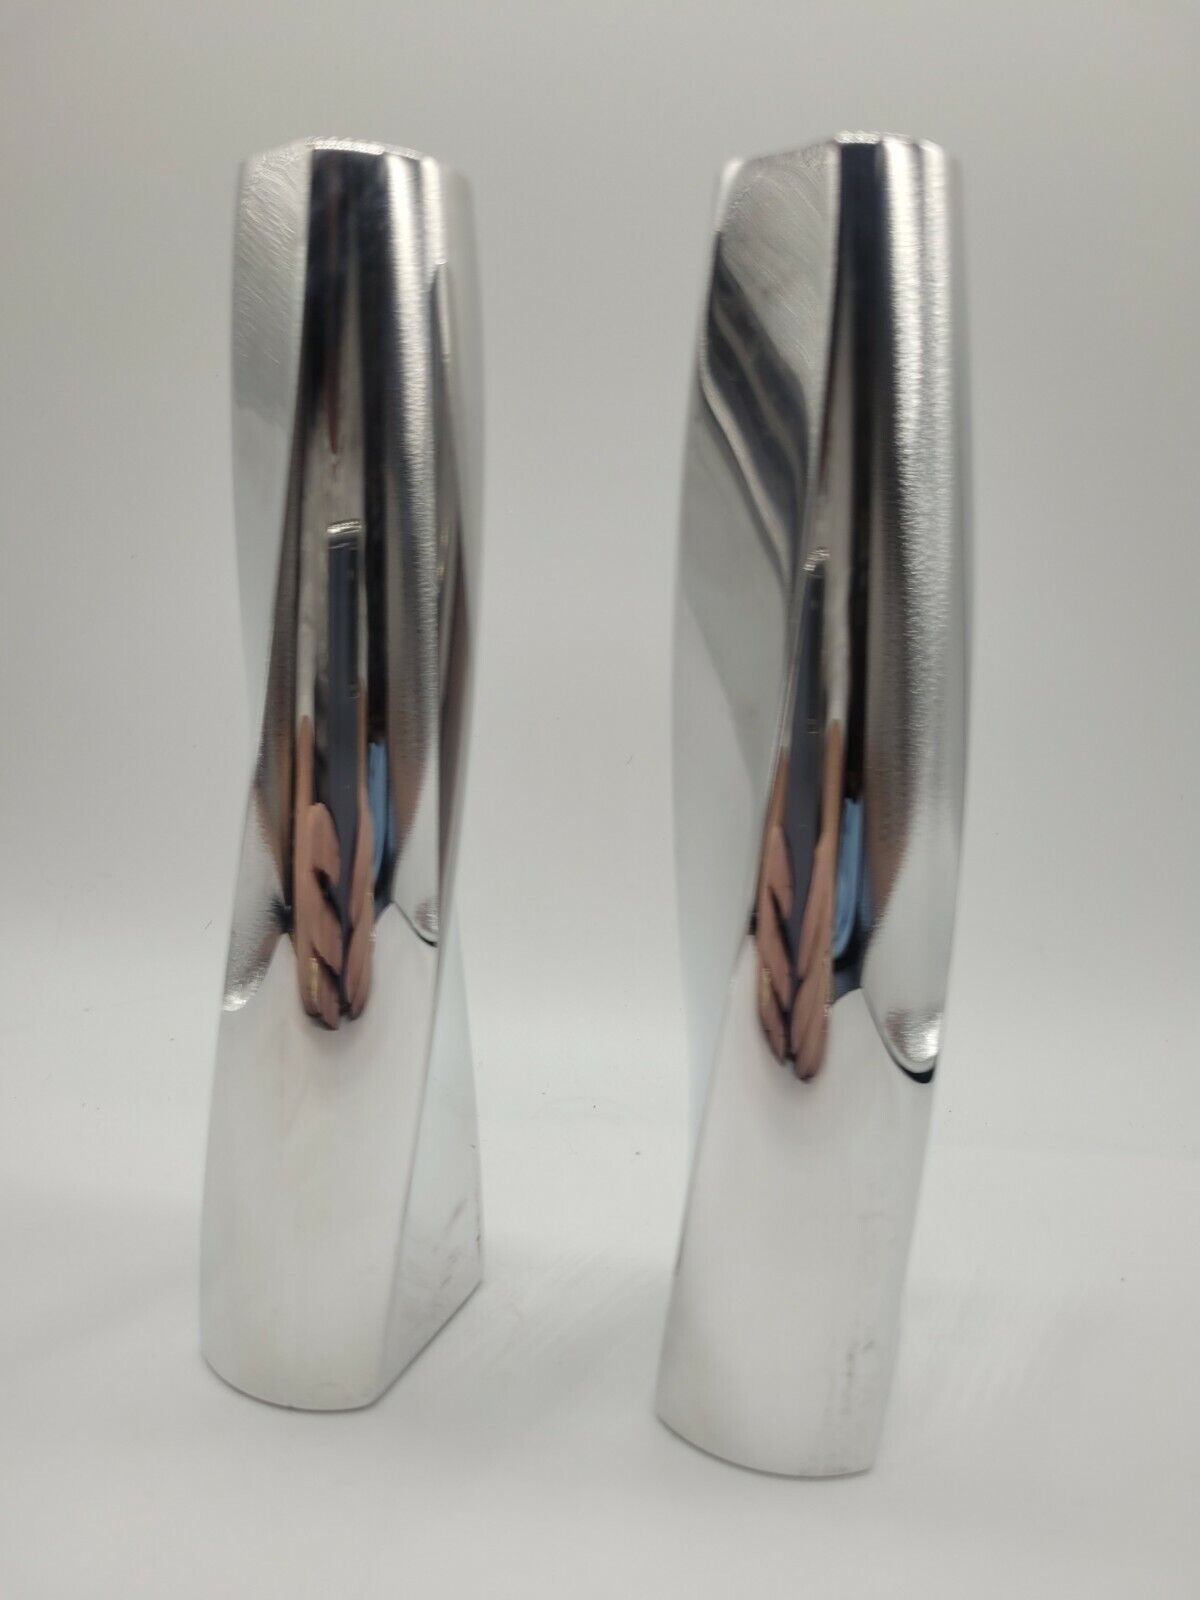 NAMBE Pair Twist Fred Bould 6236 Silver Candlesticks Holders 7” 2002 Pair Nambé NAMBE Twist Fred Bould 6236 - фотография #2